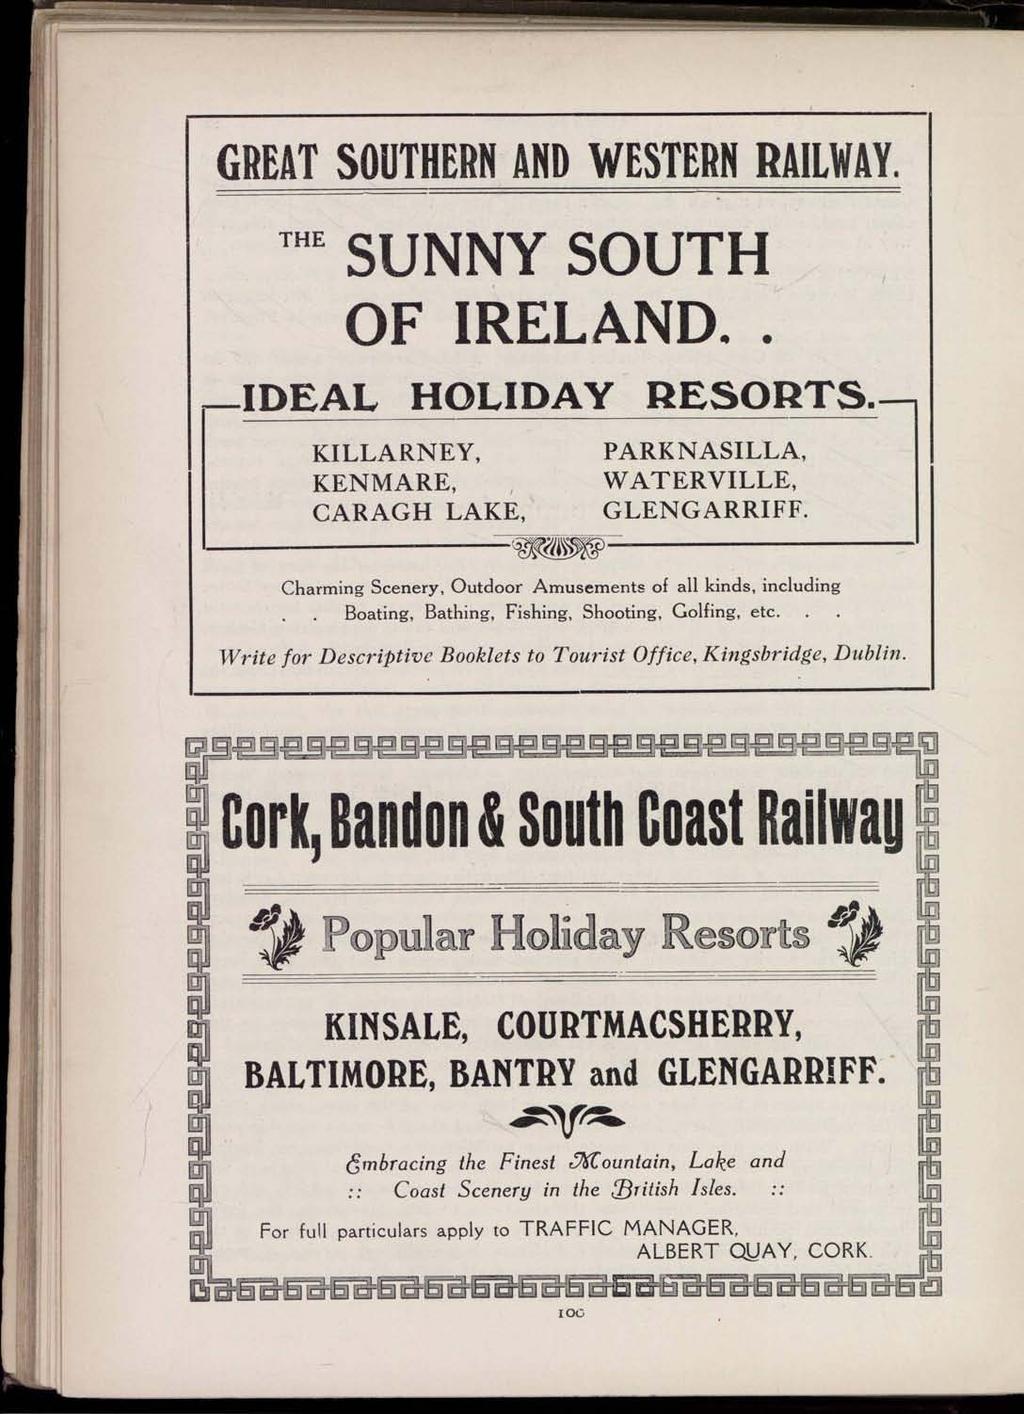 GREAT SOUTHERN AND WESTERN RAILWAY. THE SUNNY SOUTH OF IRELAND.. IDEAL HOLIDAY RESORTS. KILLARNEY, KENMARE, CARAGH LAKE, PARKNASILLA, WATERVILLE, GLENGARRIFF.